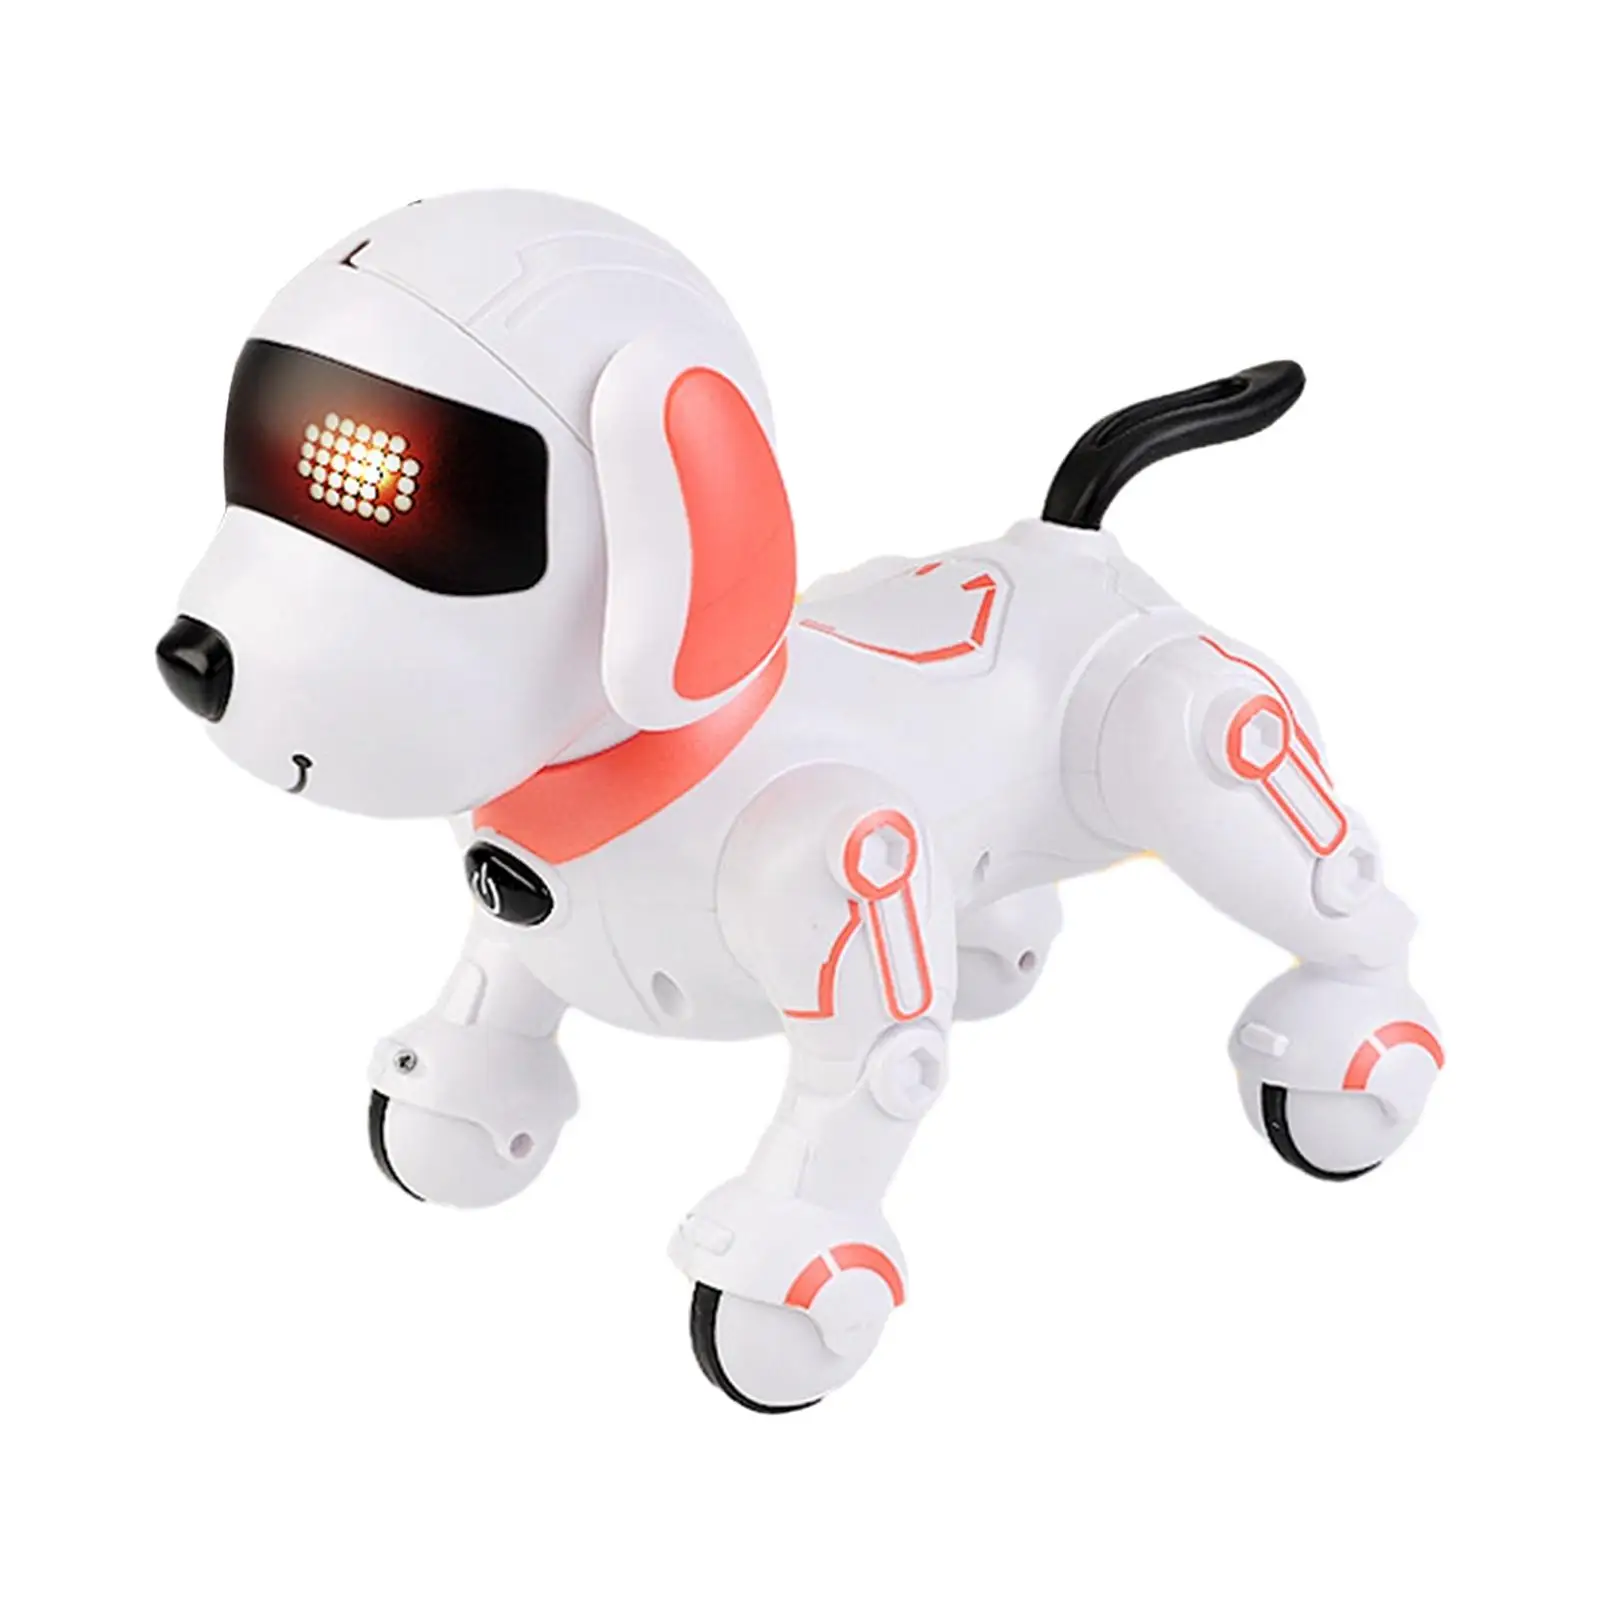 Remote Control Robot Dog Toy Electronic Pet Toy for Kids 5 6 7 8 9 10 11 12